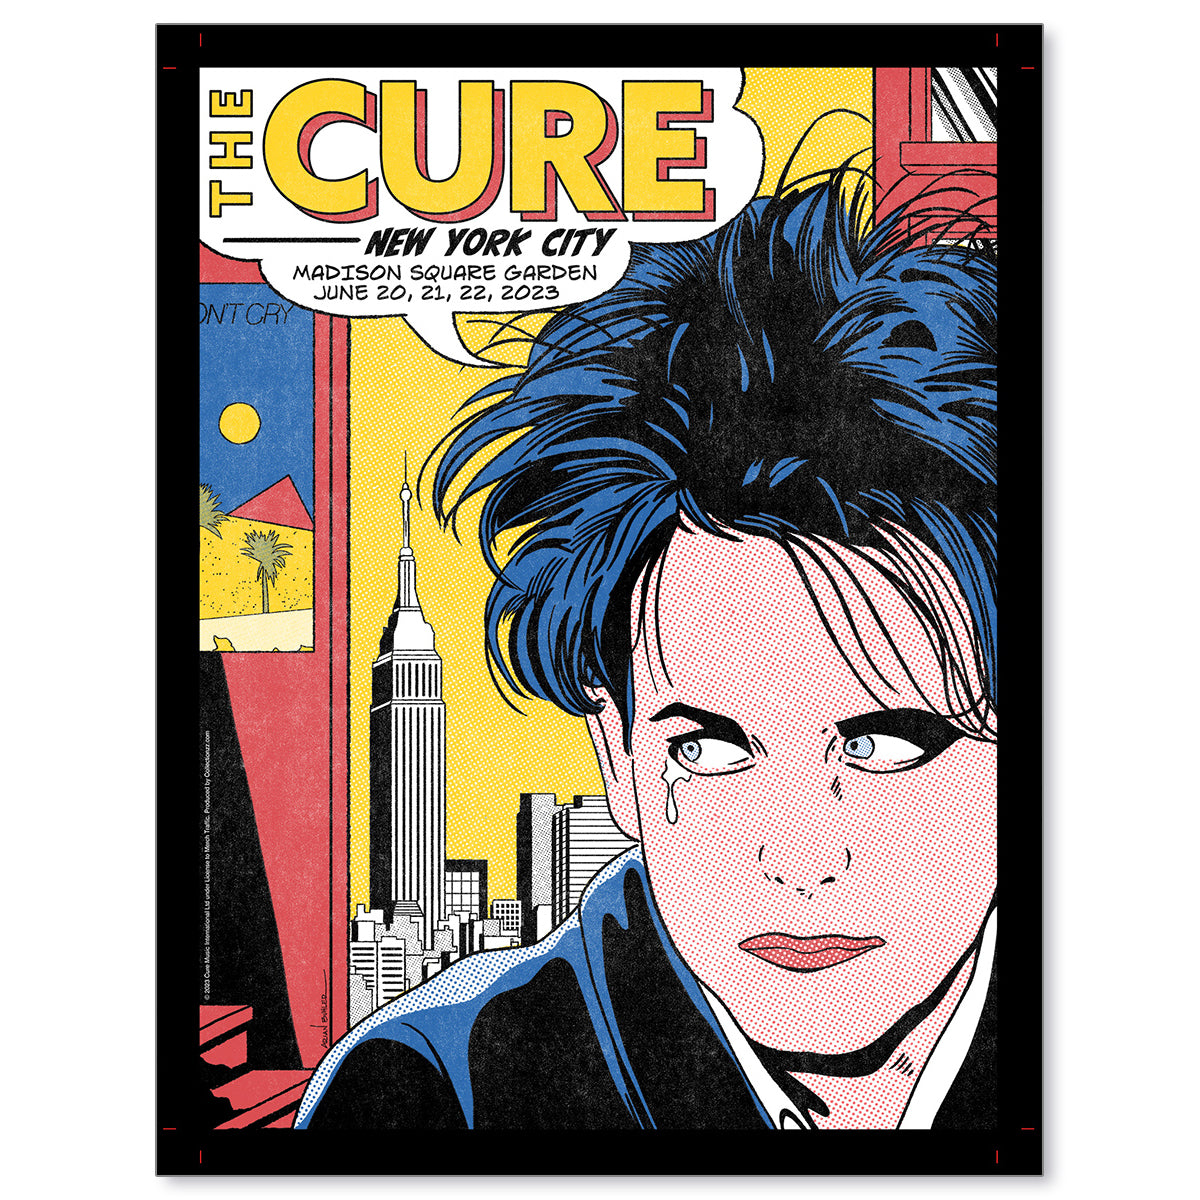 The Cure New York City June 20-22, 2023 First Edition Poster